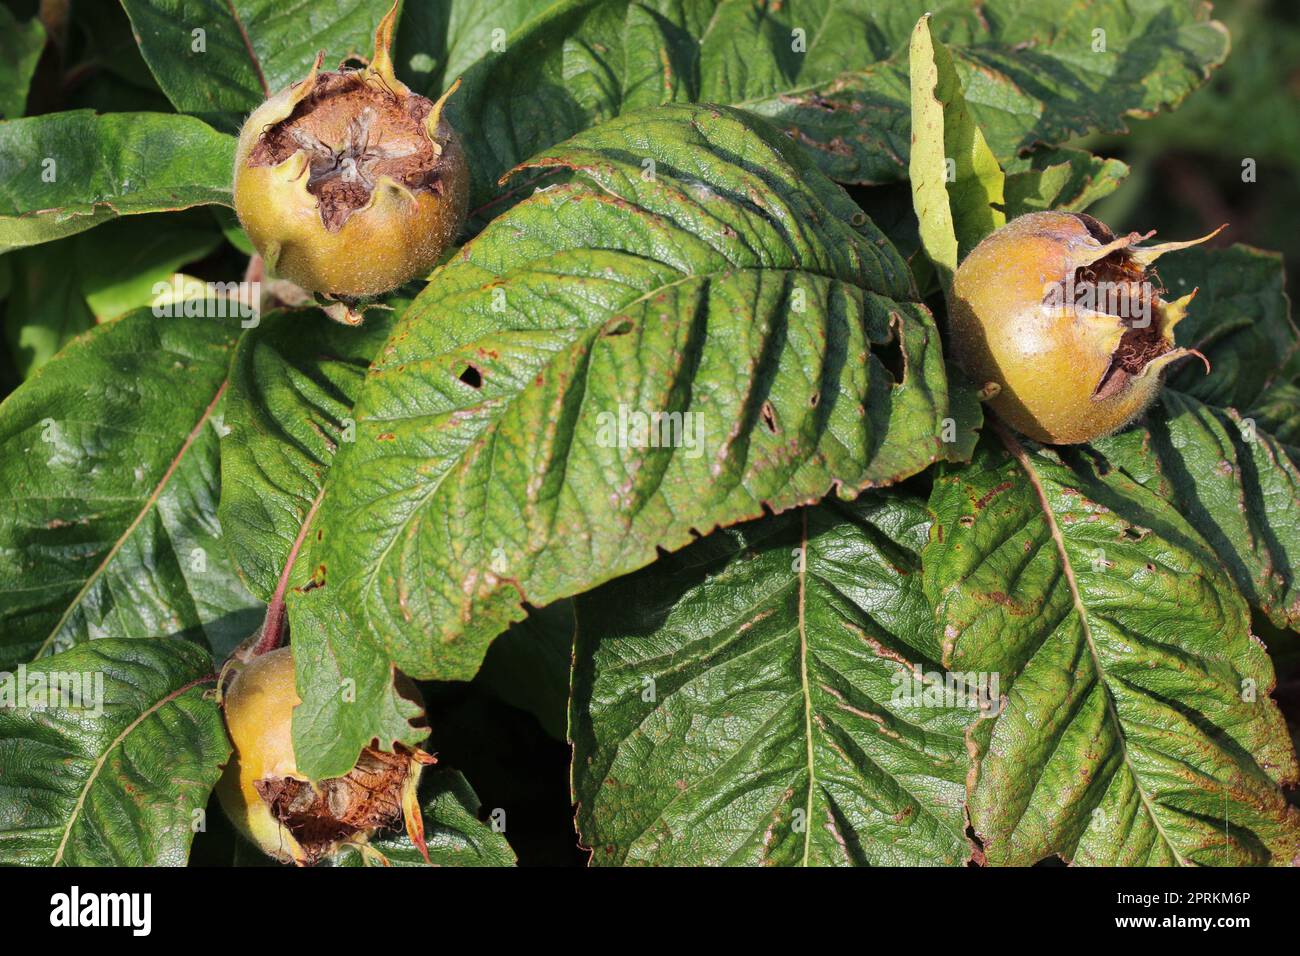 Ripe medlar, Mespilus germanica, fruits on a tree with leaves blurred as the background. Stock Photo